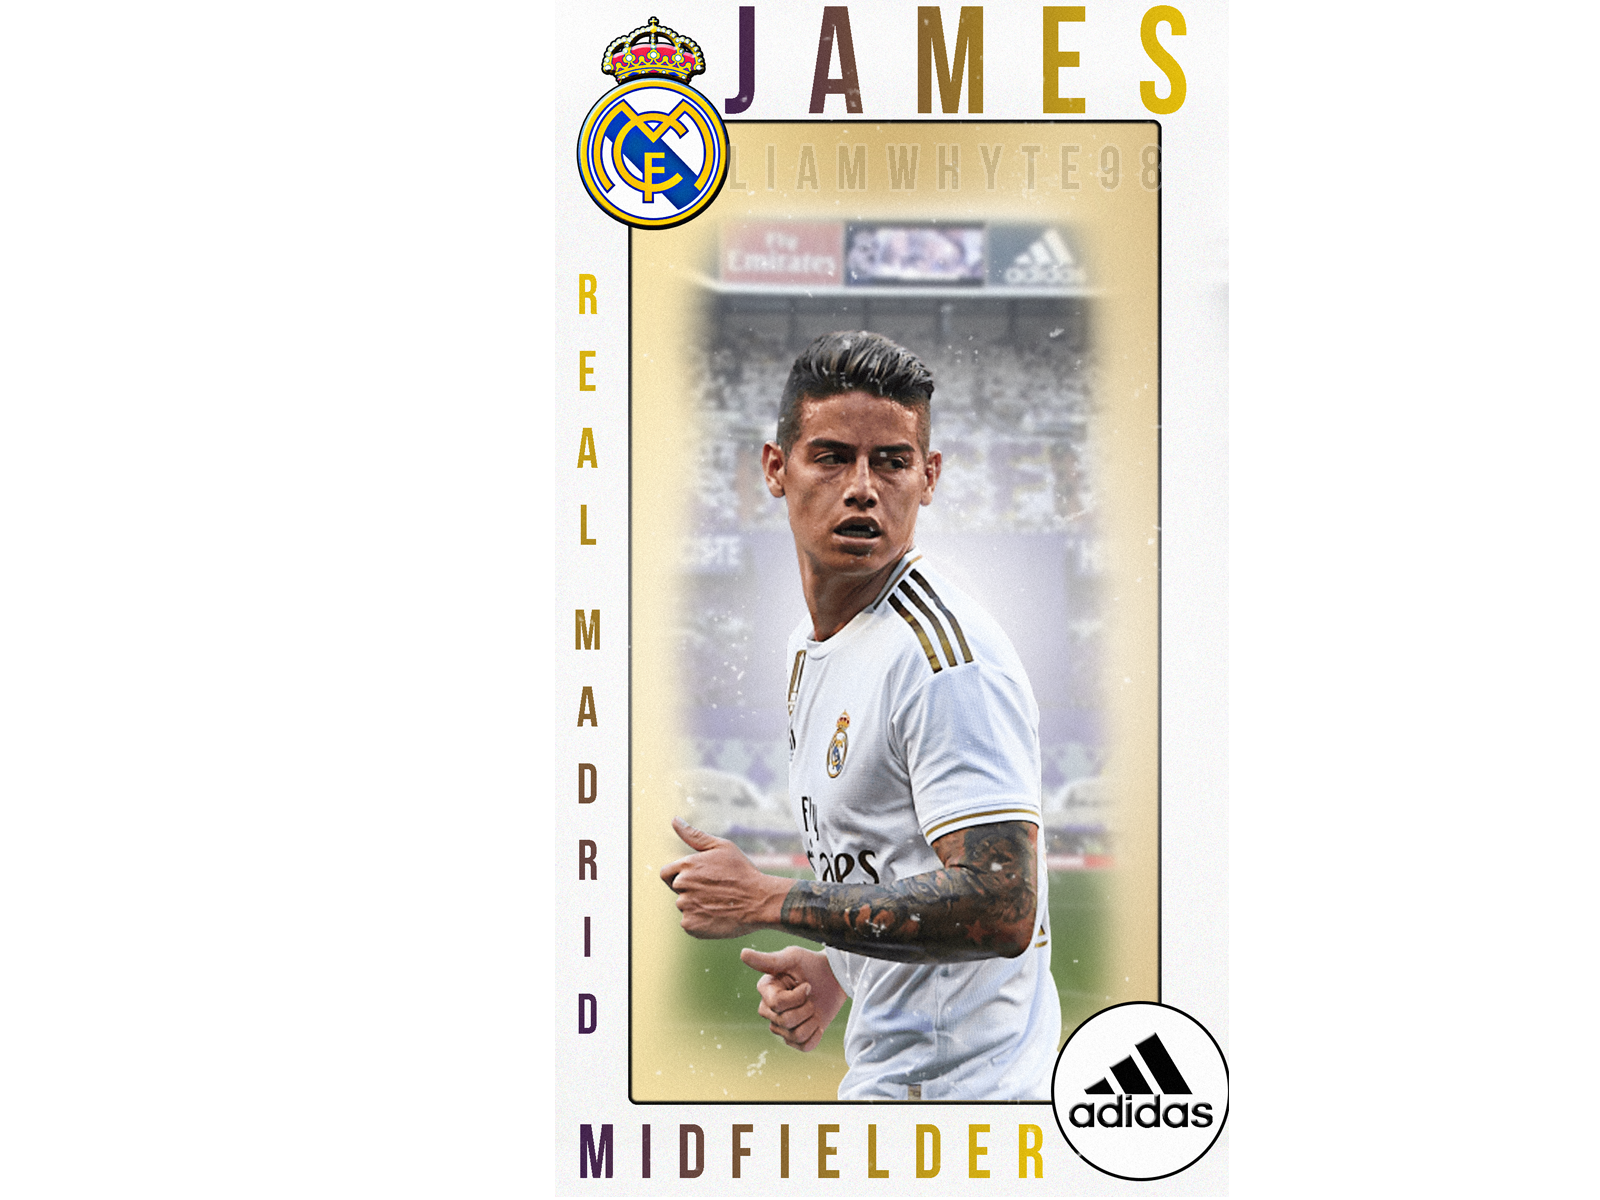 James Rodriguez - Real Madrid Player Card Profile/Trading Card design fifa fifa 20 football football club football design football edit footballer illustration james rodriguez photoshop player profile poster real madrid soccer soccer edit trading card wallpaper